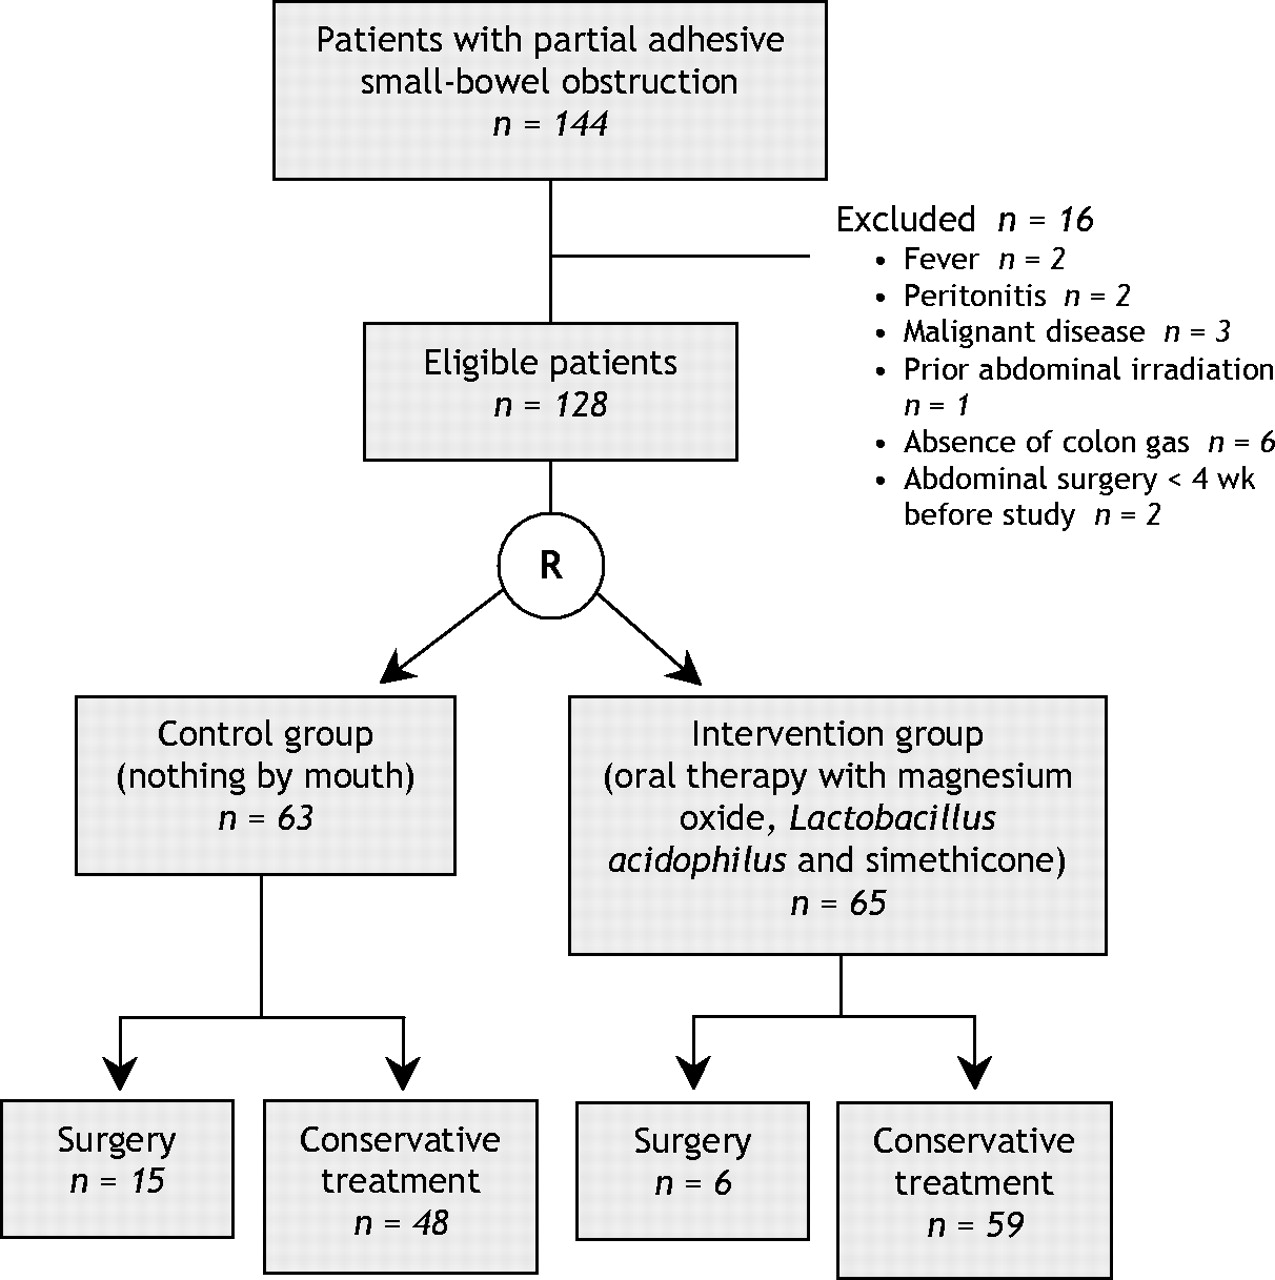 Nonsurgical Management Of Partial Adhesive Small Bowel Obstruction With